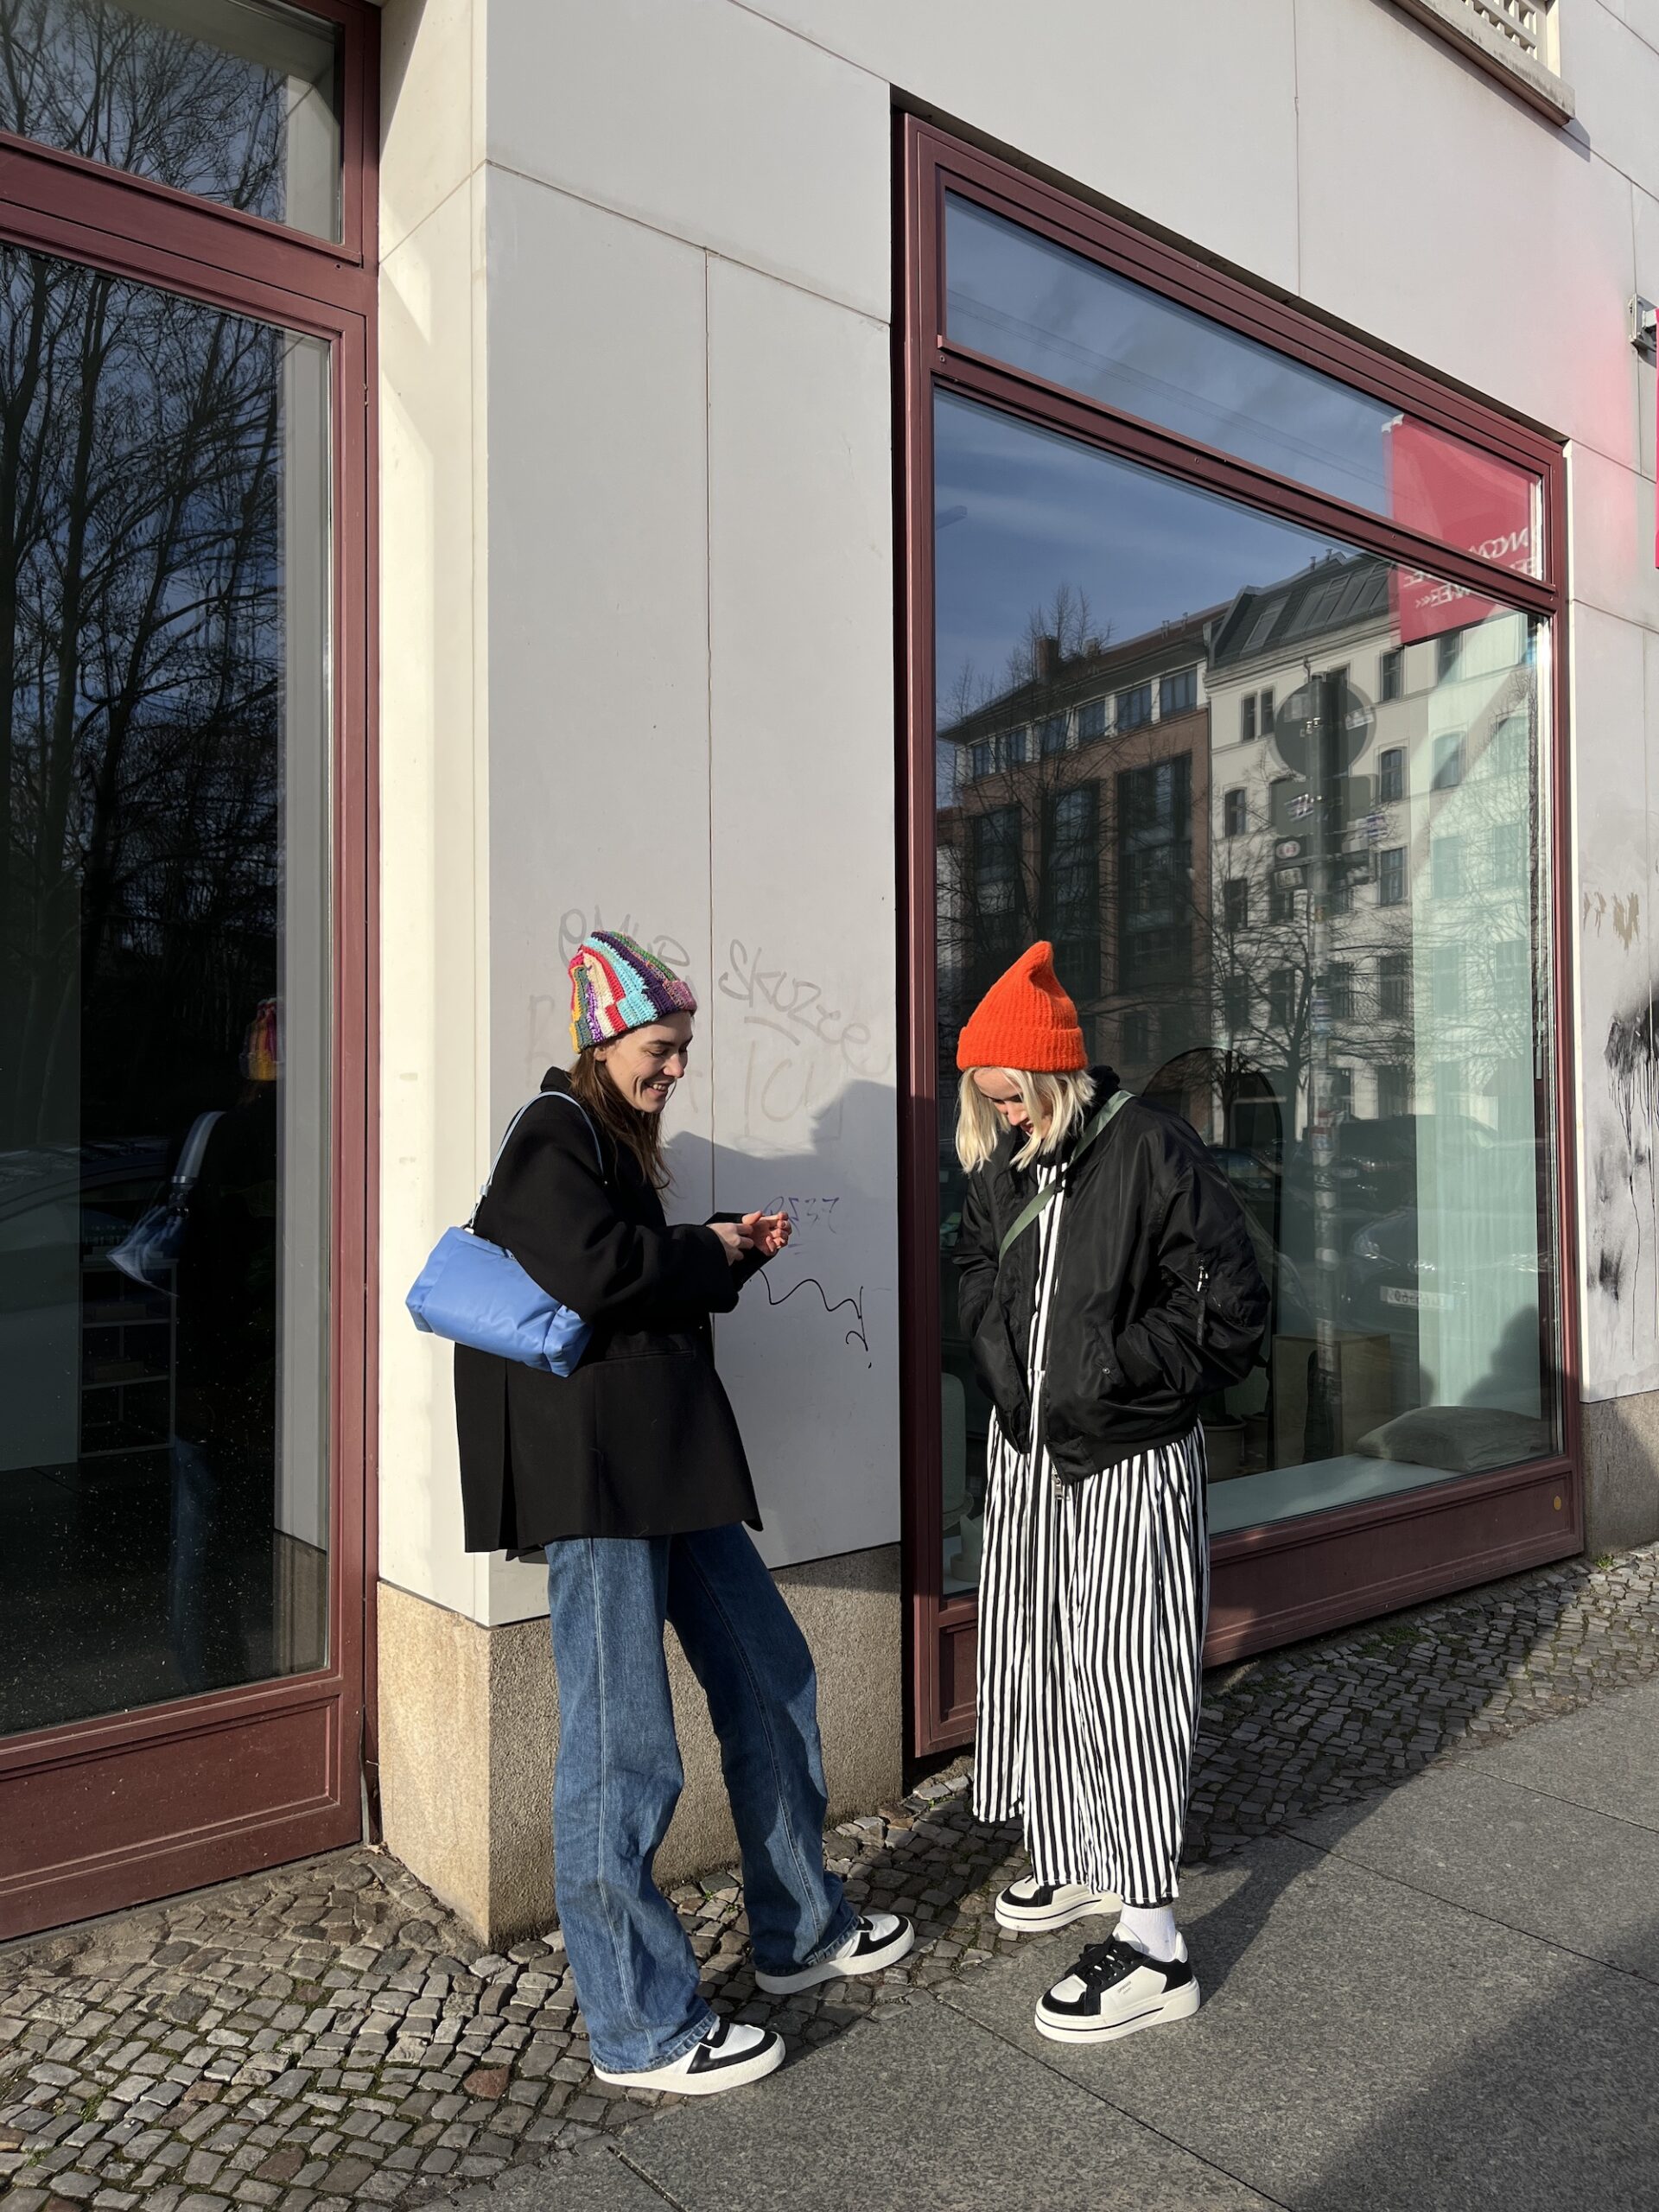 The German singer Mogloi and her Influencer friend Isismarianiedecken are happily standing together in front of a house. 
They are both wearing two of our new sneaker styles such as the CPH181 leather mix black/creme beige. And the CPH264 vitello black/white. 